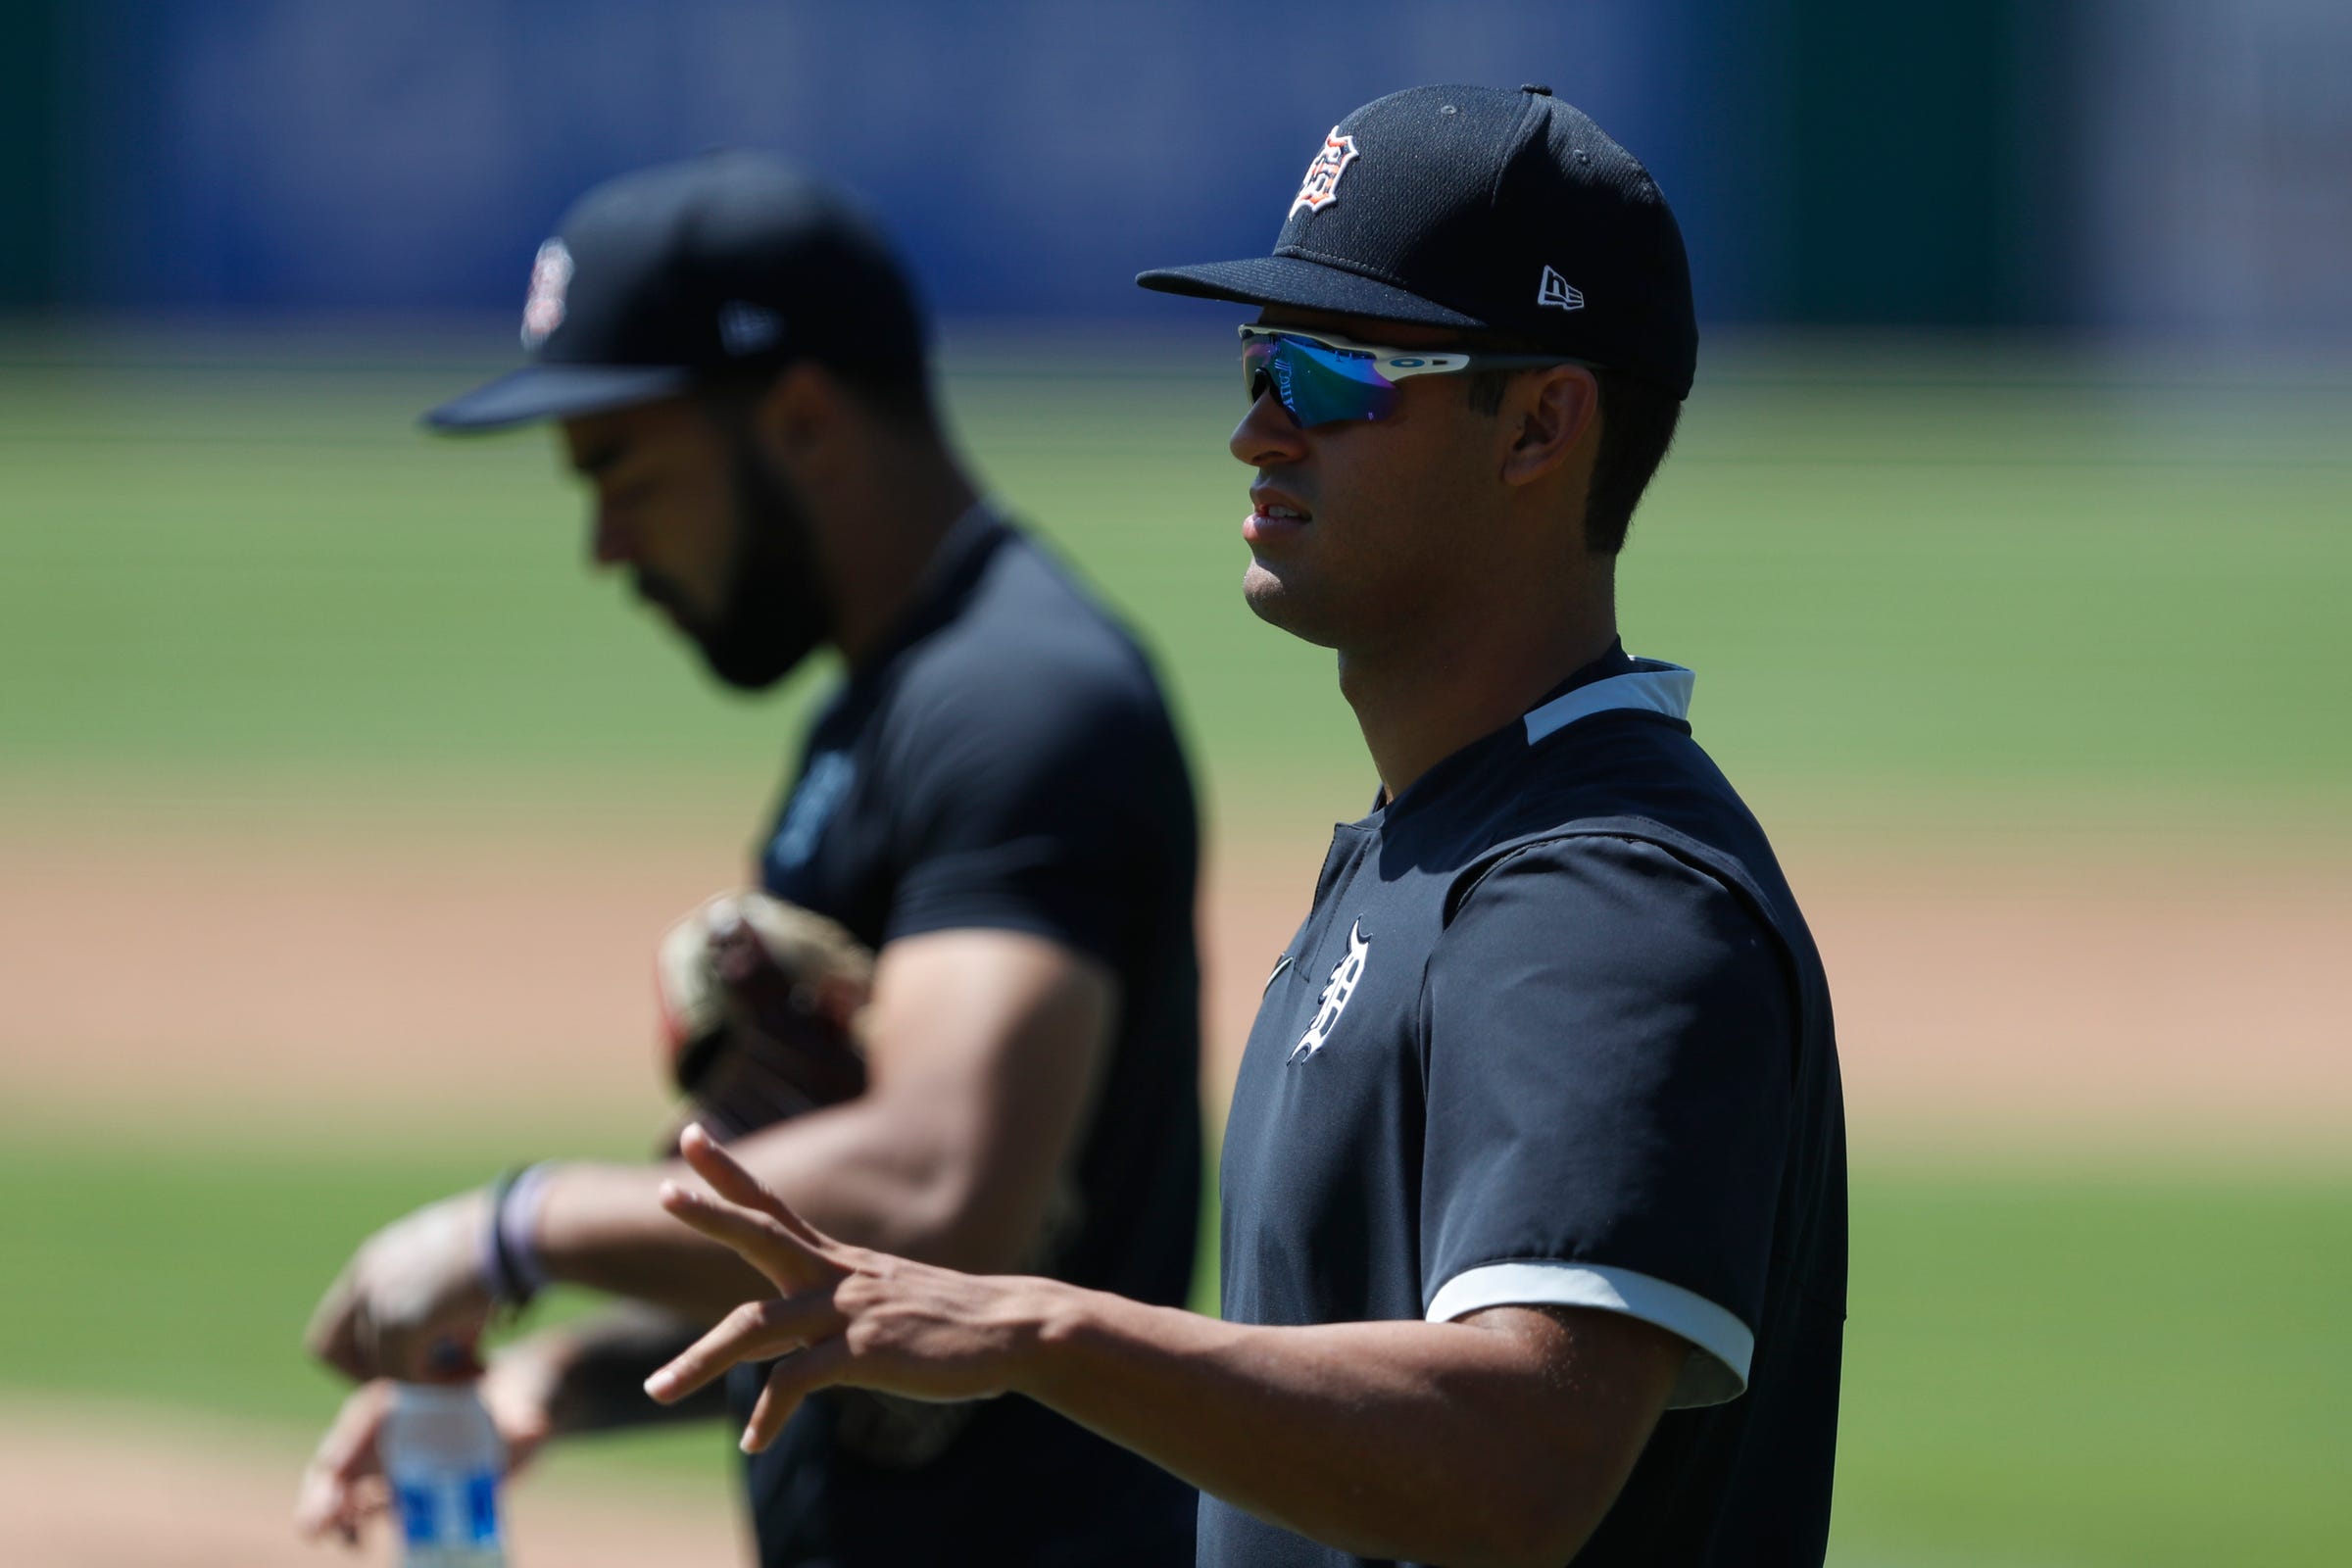 Detroit Tigers outfielder Riley Greene showed off his talent July 5, 2020, during summer camp workouts at Comerica Park.